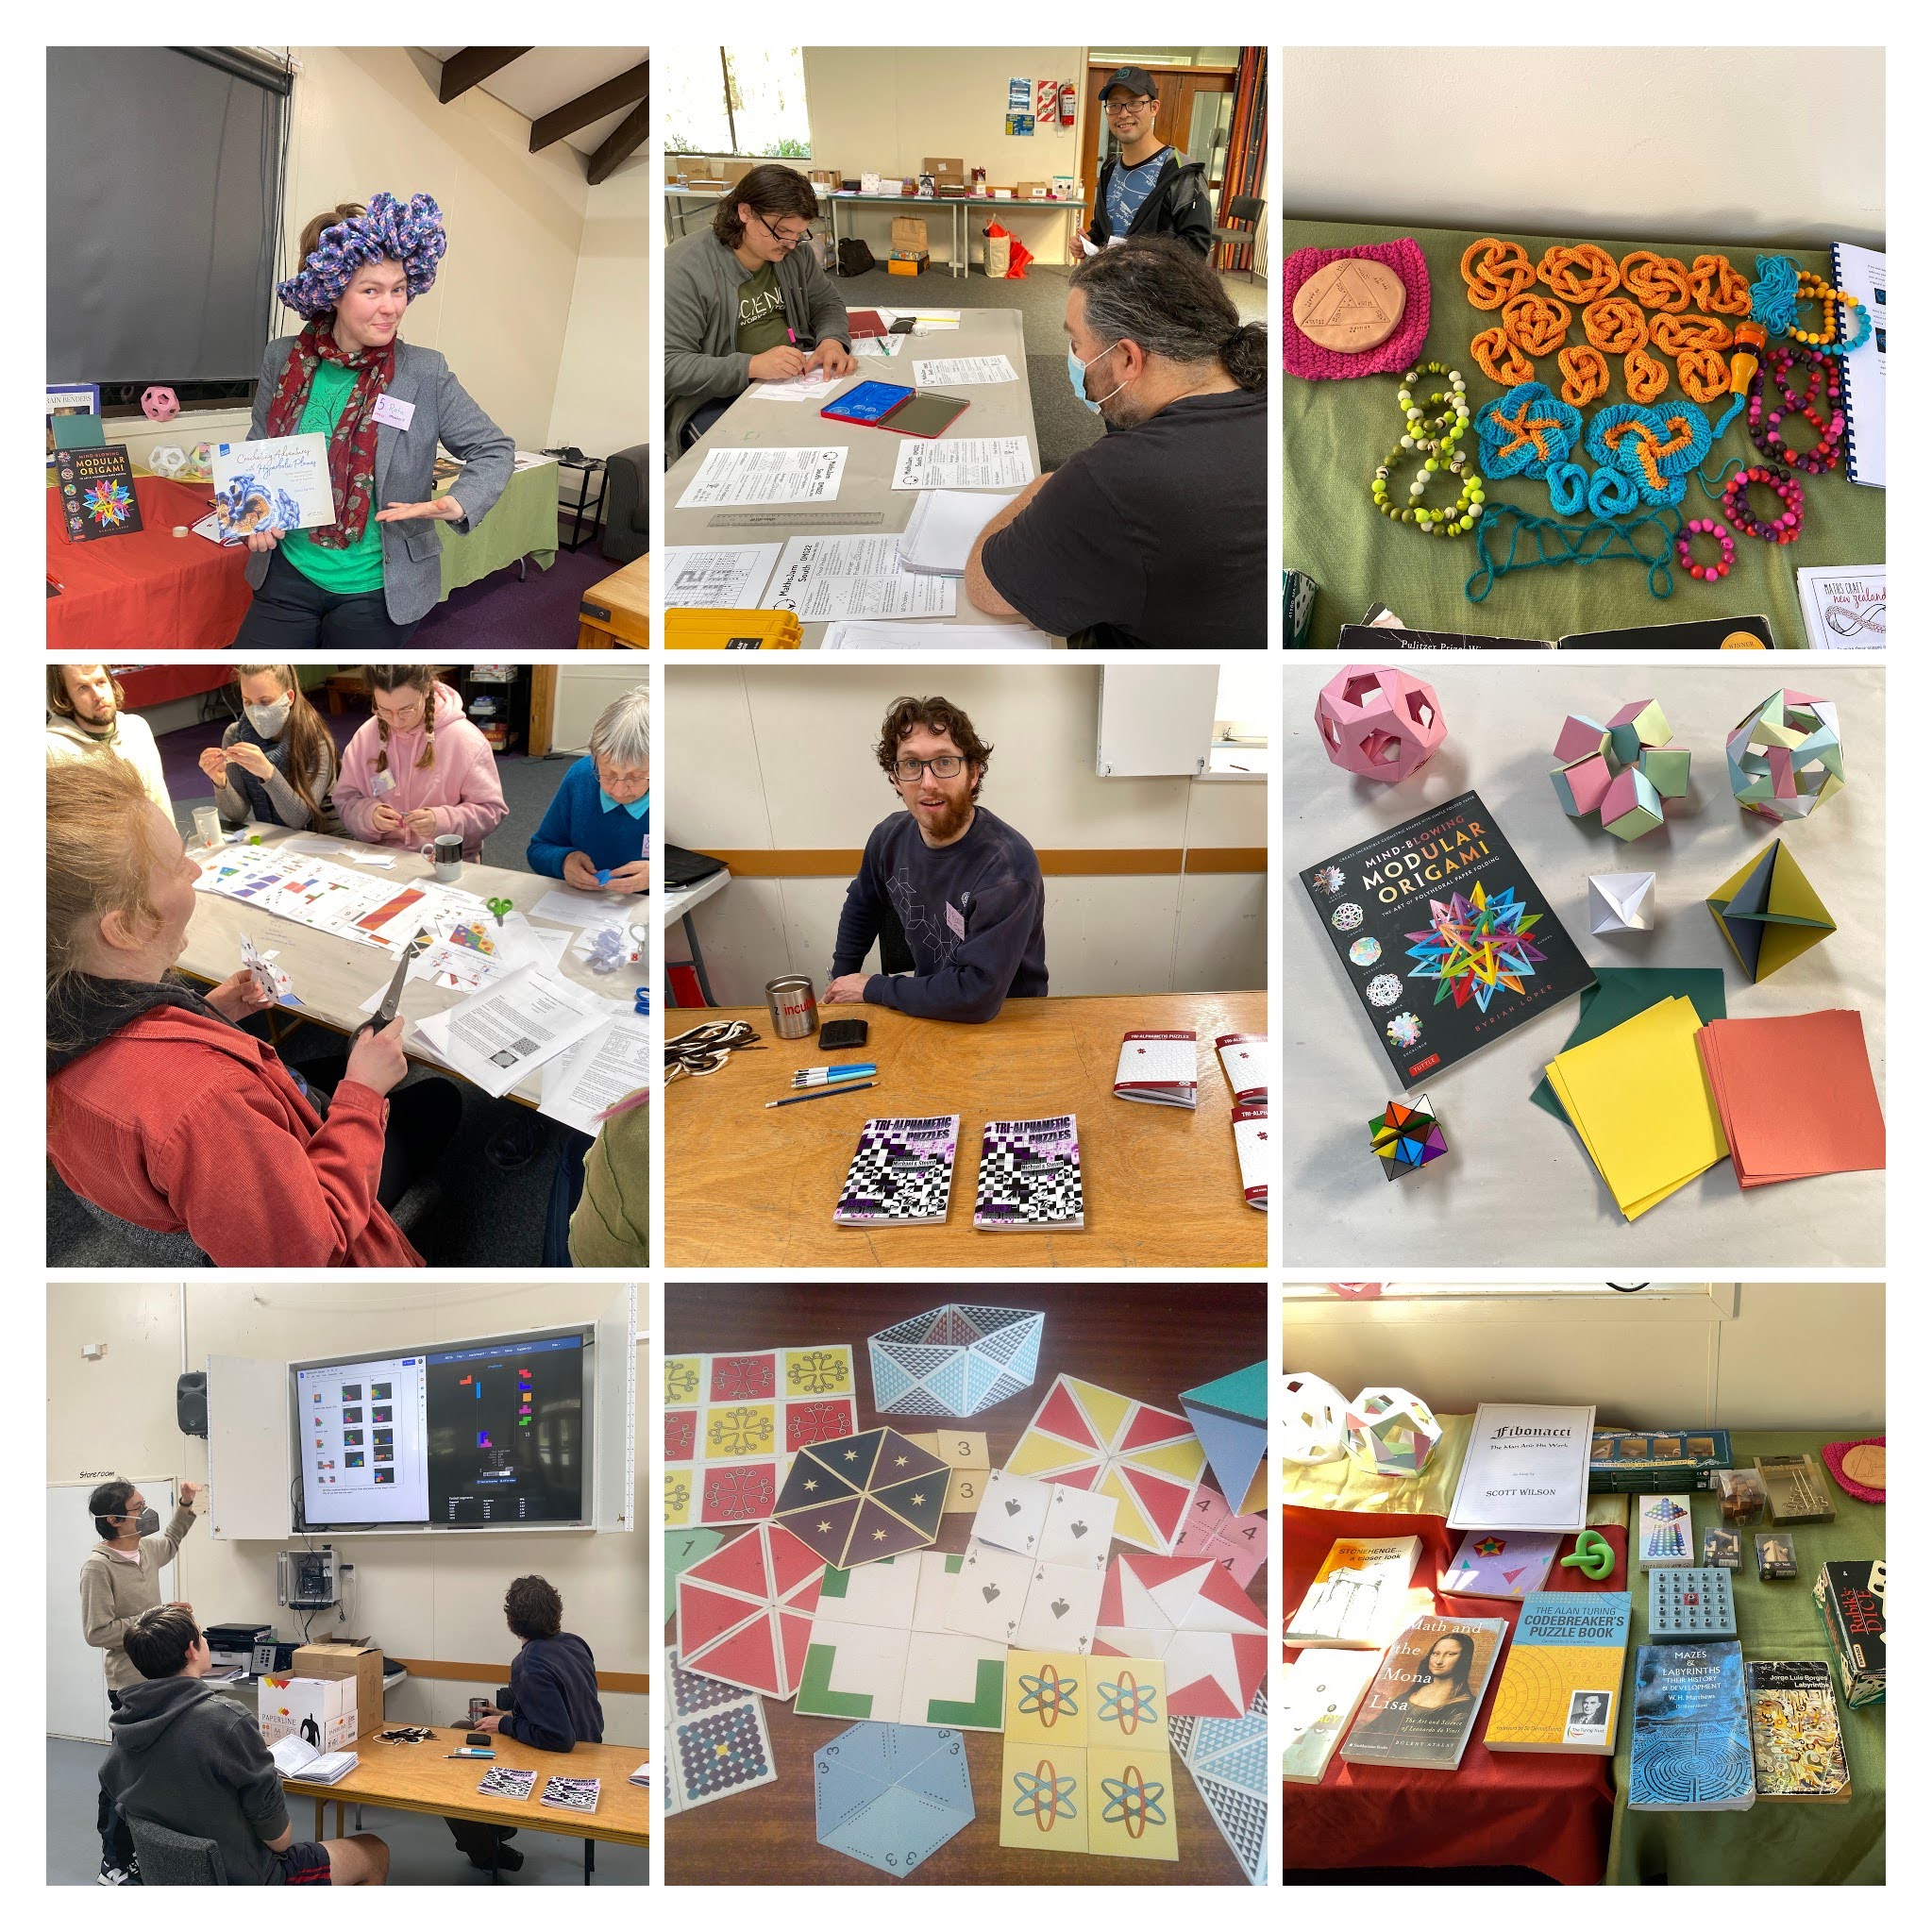 A collage of some of the Sunday Tables activities. (L-R: Rata wearing a crochet hyperbolic plane; playing with spirogrpahs; knitted knots; scissors out at the hexaflexagon station; Ross selling books; modular origami; Chris showing a perfect clear Tetris; hexaflexagons; a selection of books on display.)